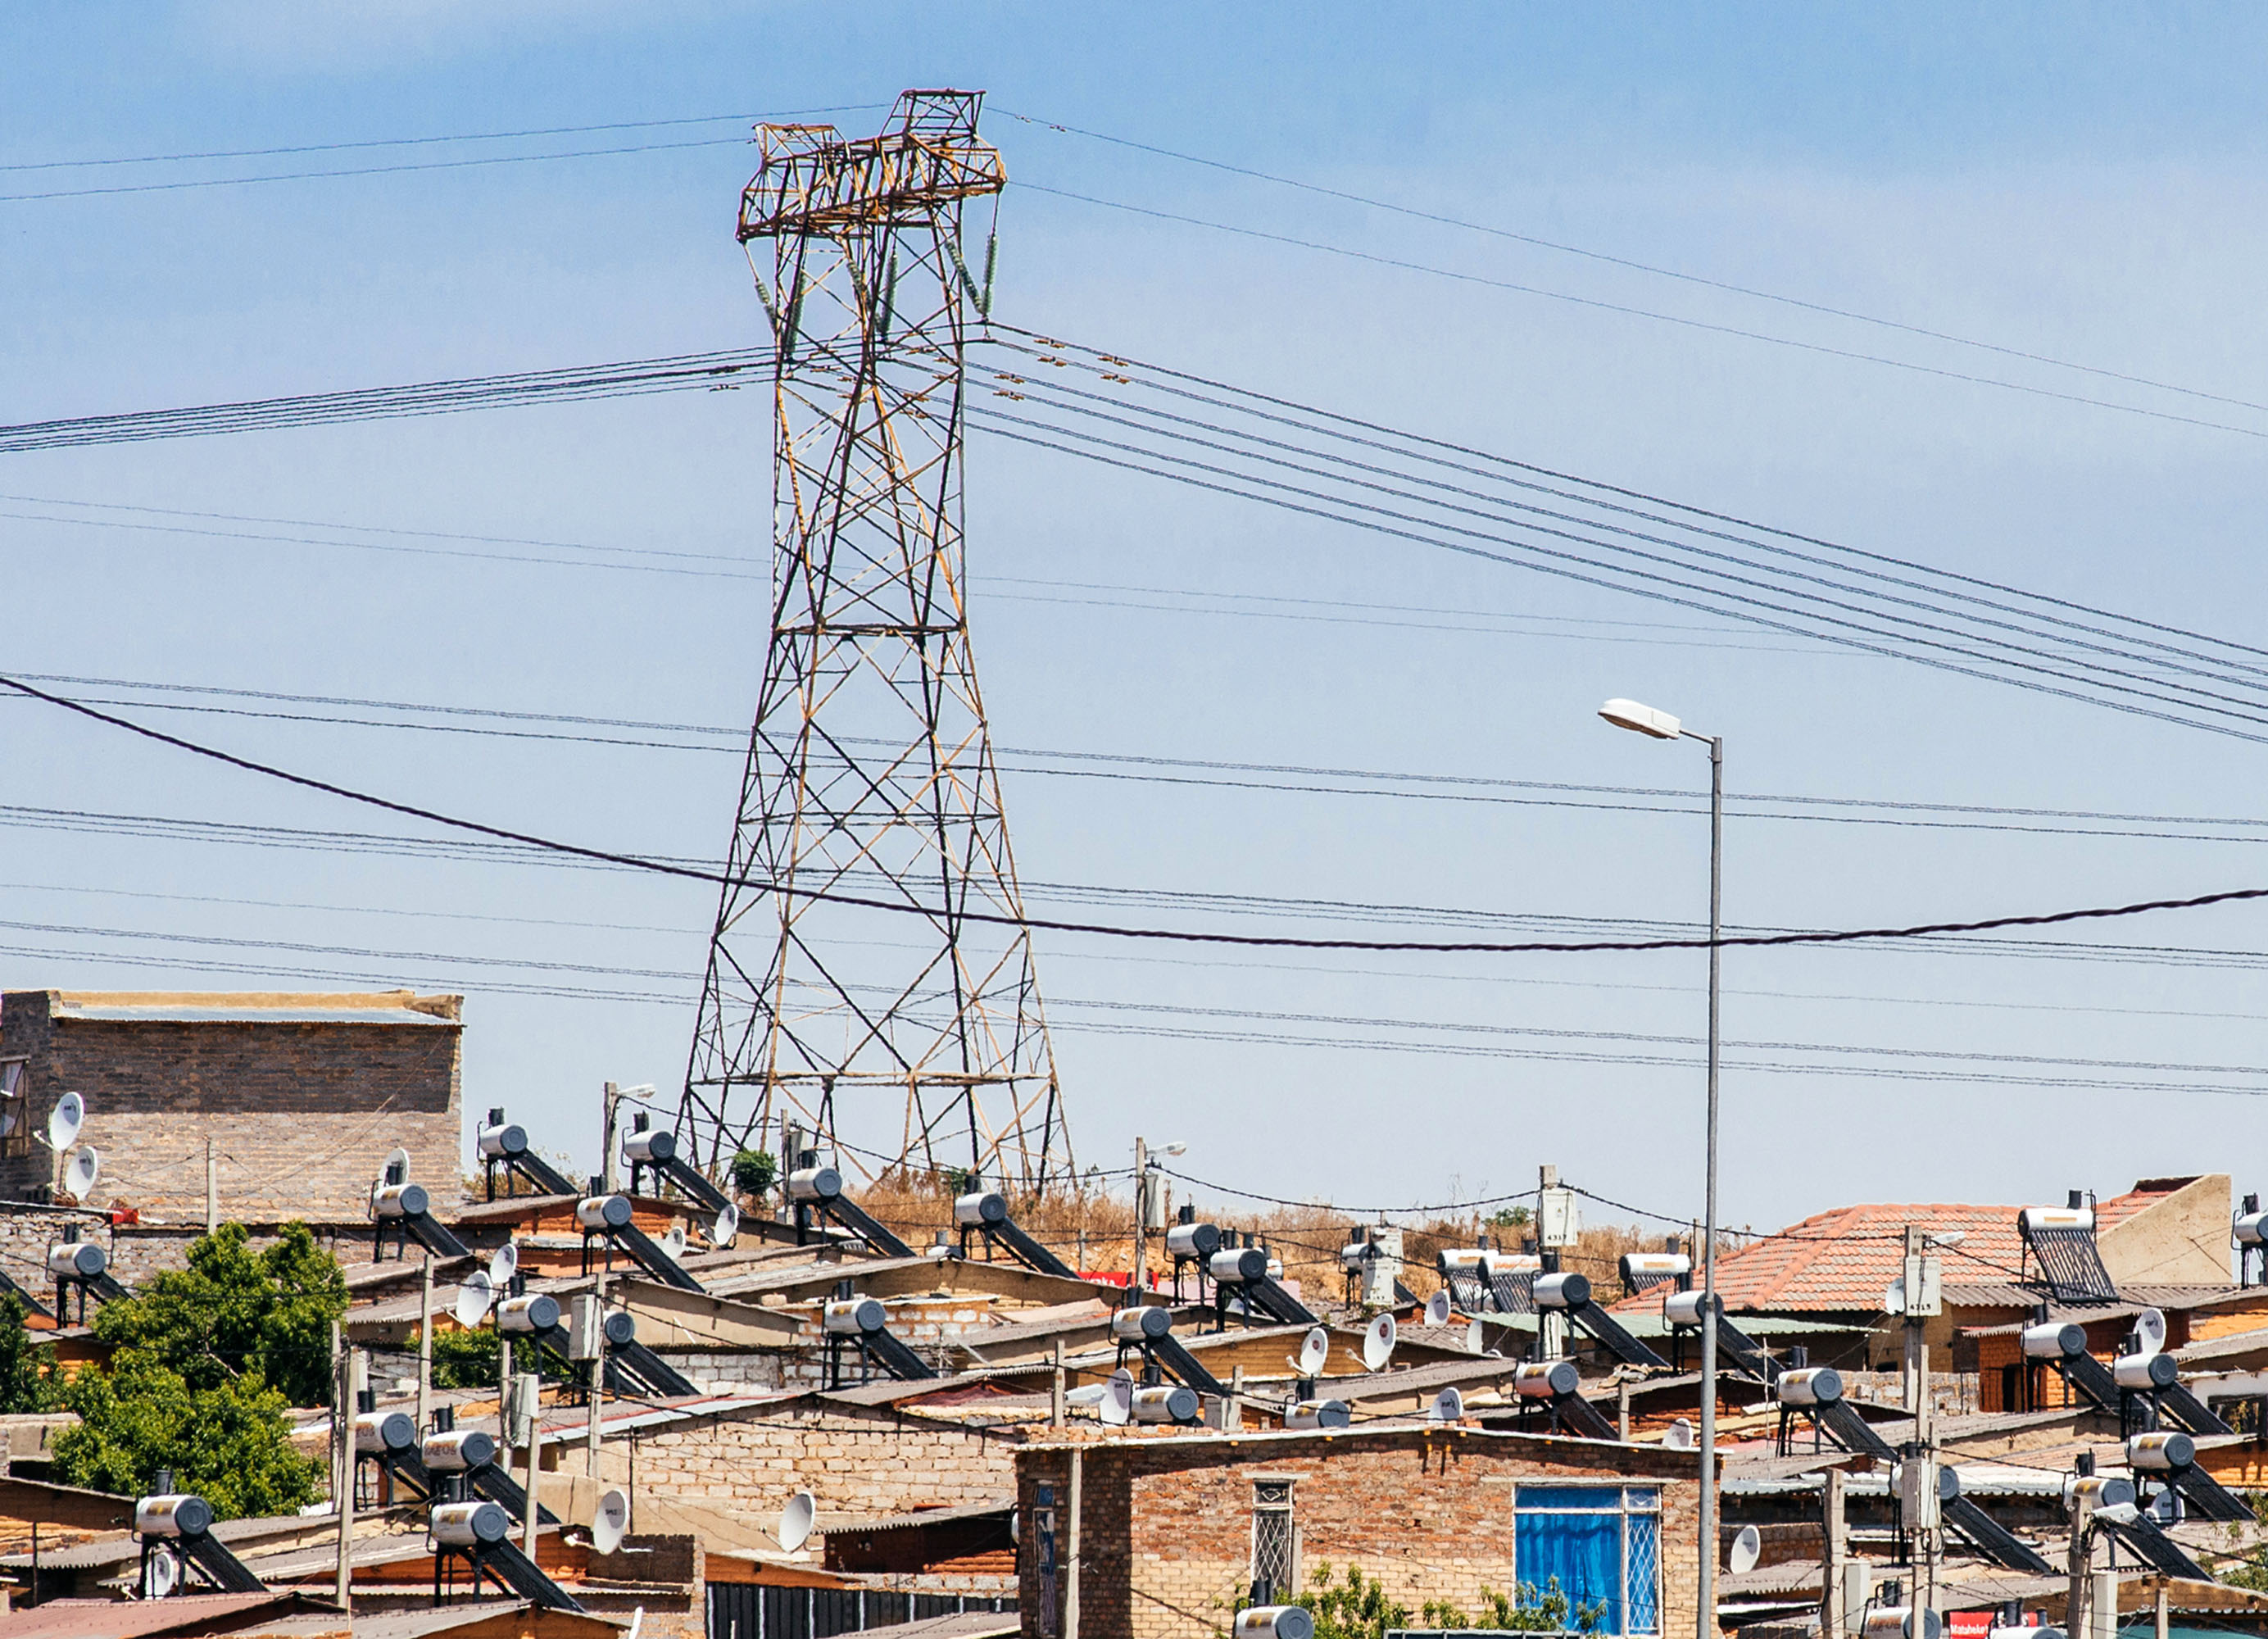 A pylon tower carries electrical power lines over residential shacks, some equipped with solar power geysers on their roofs, in the Alexandra township outside Johannesburg, South Africa.